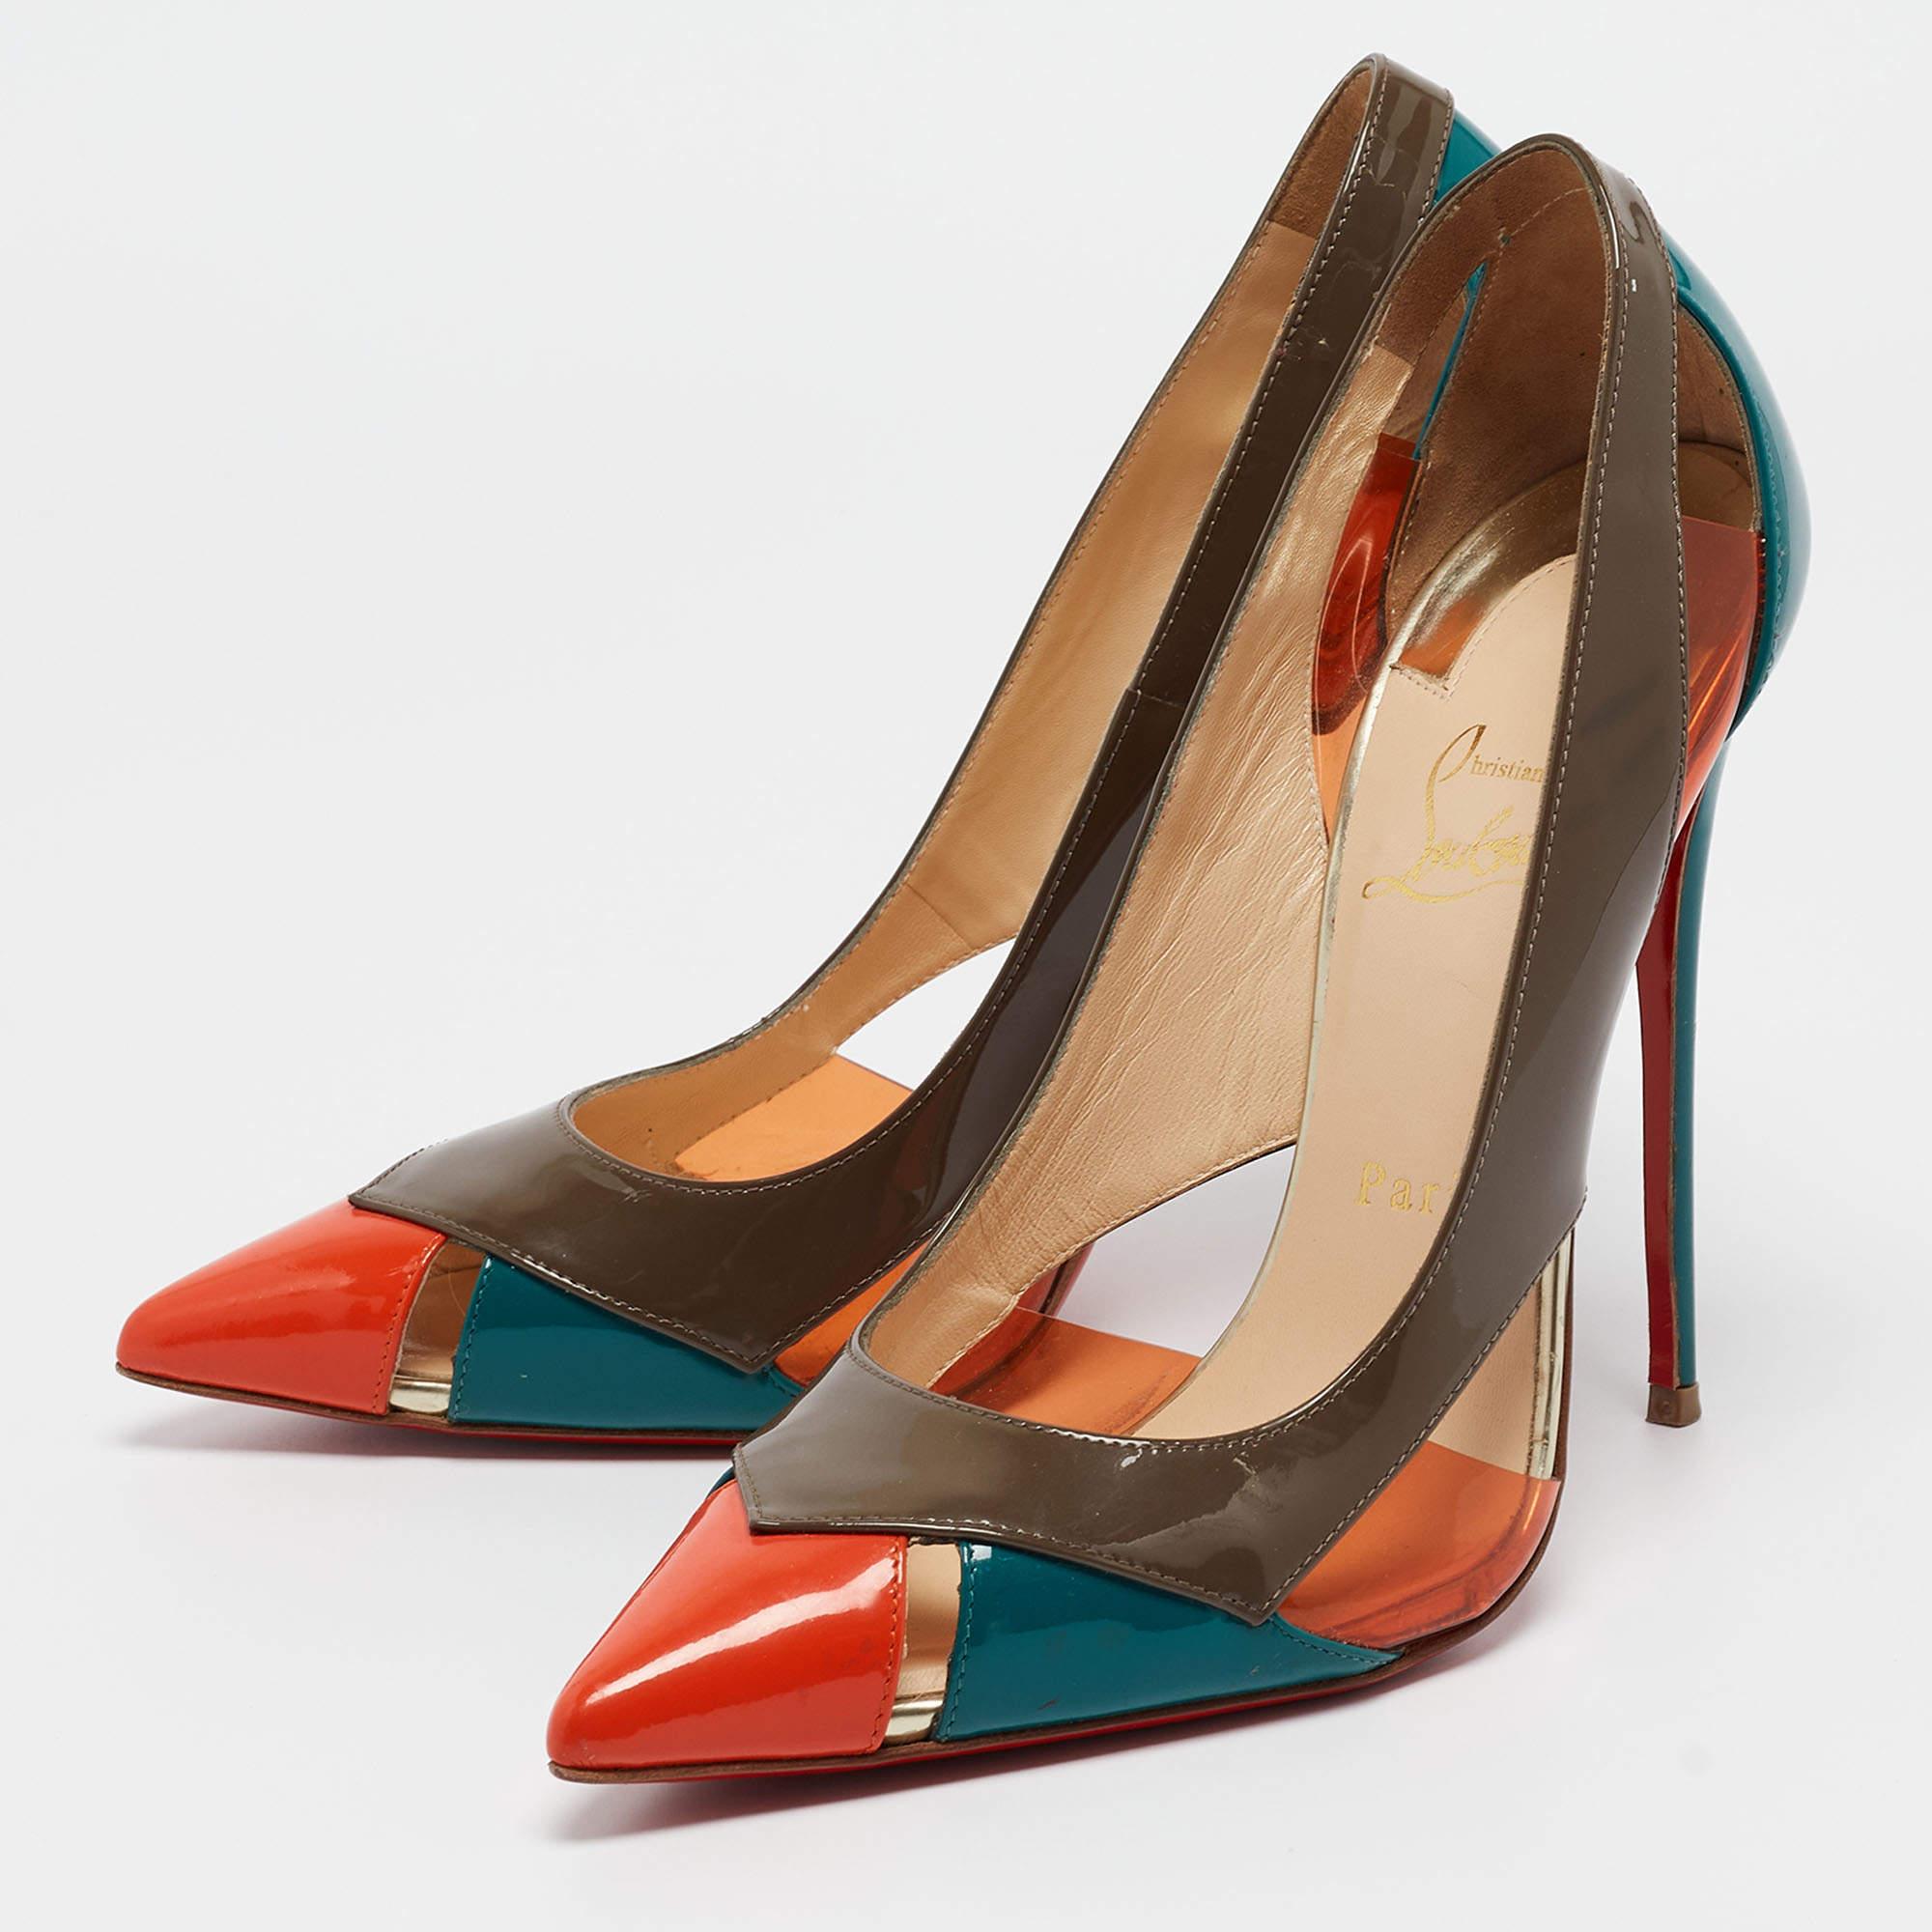 Christian Louboutin Tricolor Patent and PVC Galata Pumps Size 39 For Sale 3